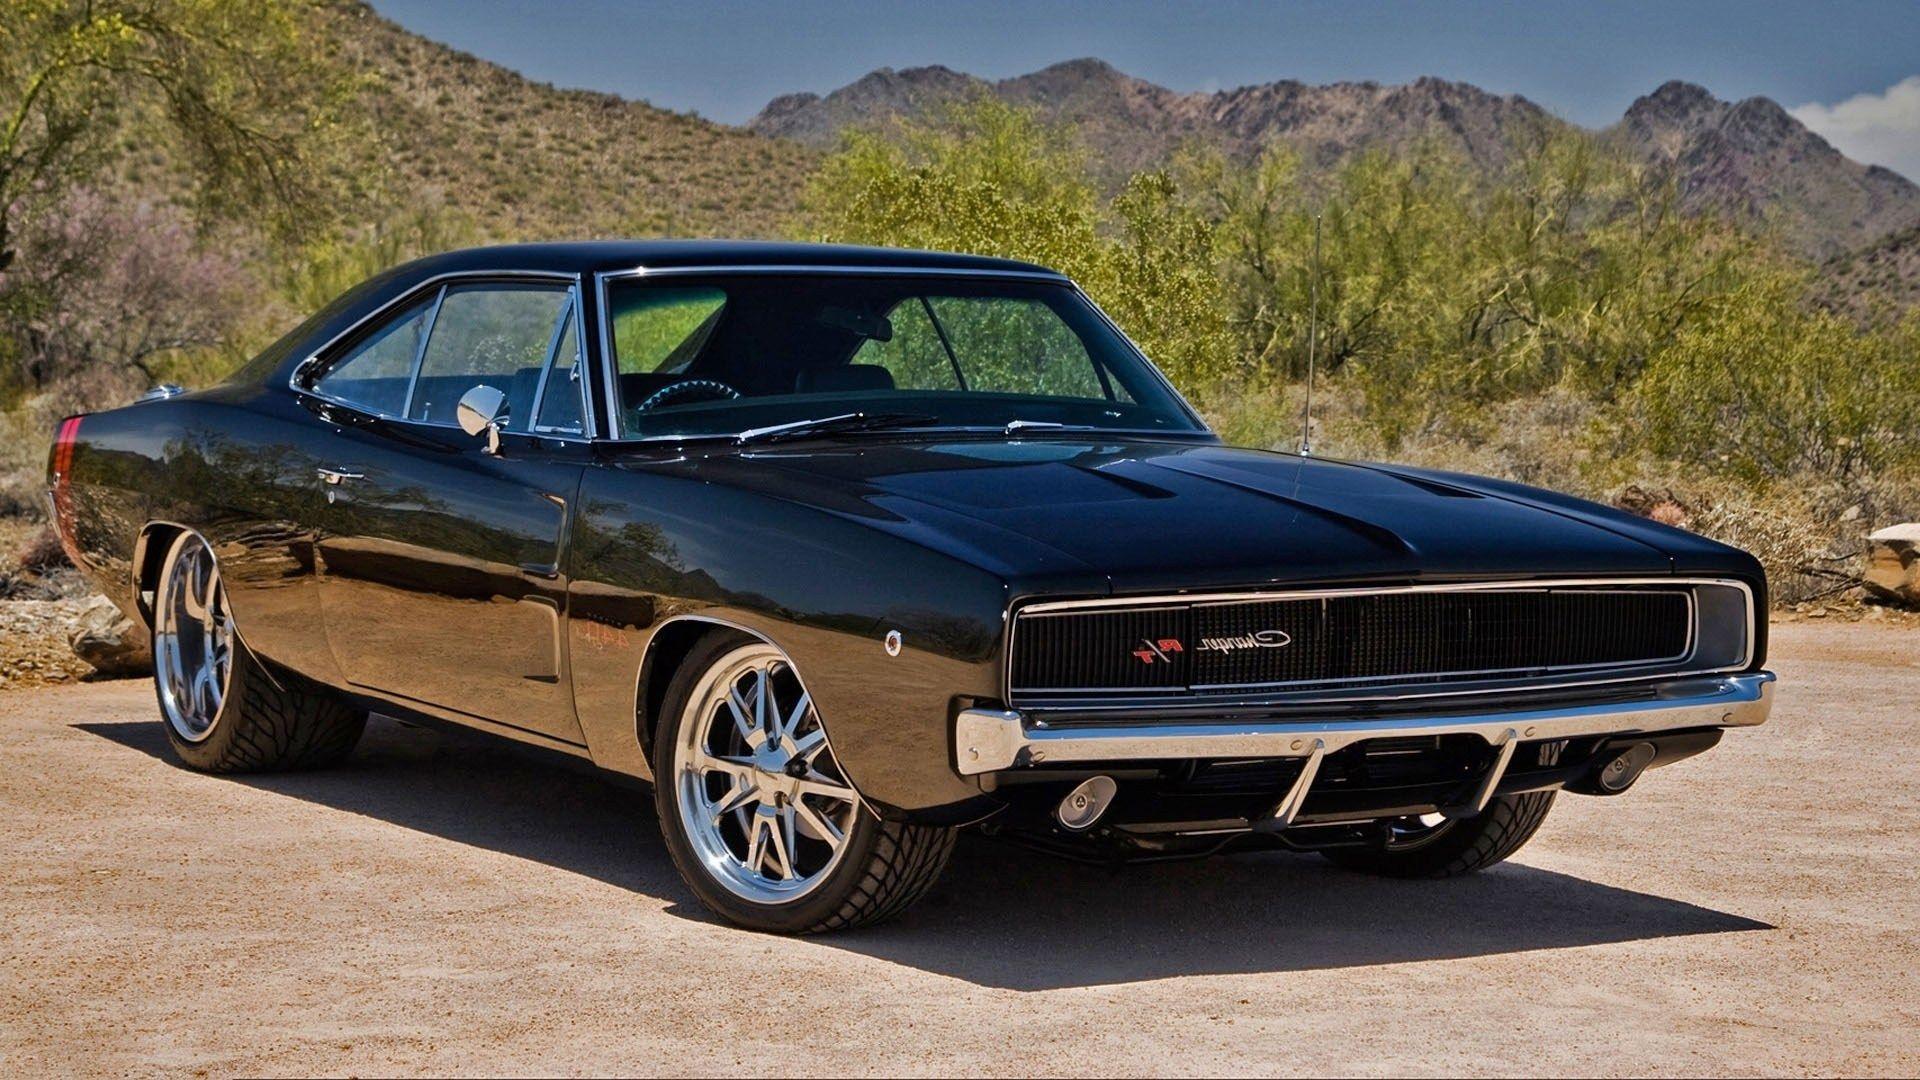 Tag For Dodge Charger Rt Wallpaper, 1968 Dodge Charger Rt Image